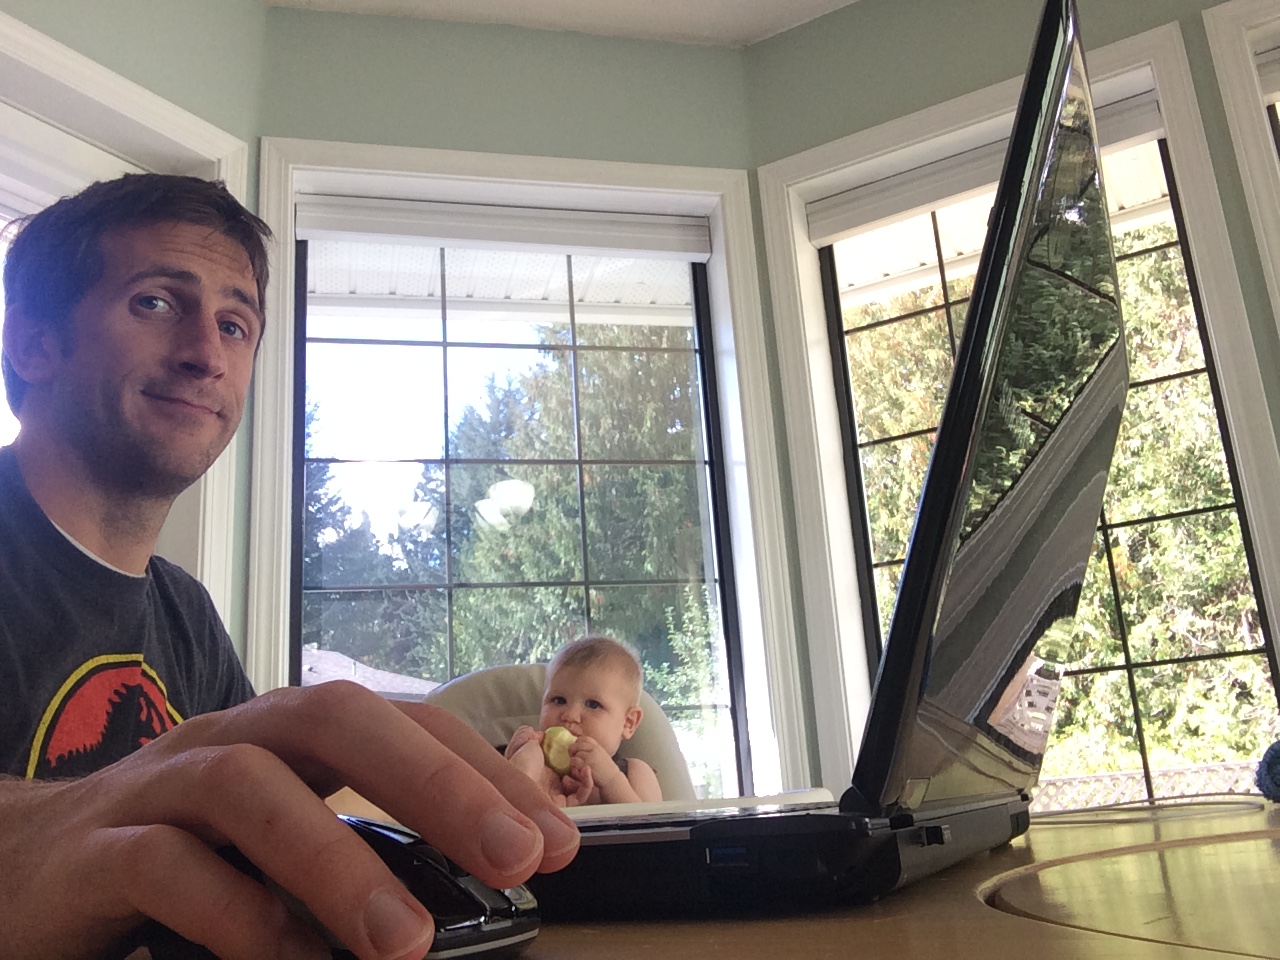 Mike Nelson working from home while feeding a baby